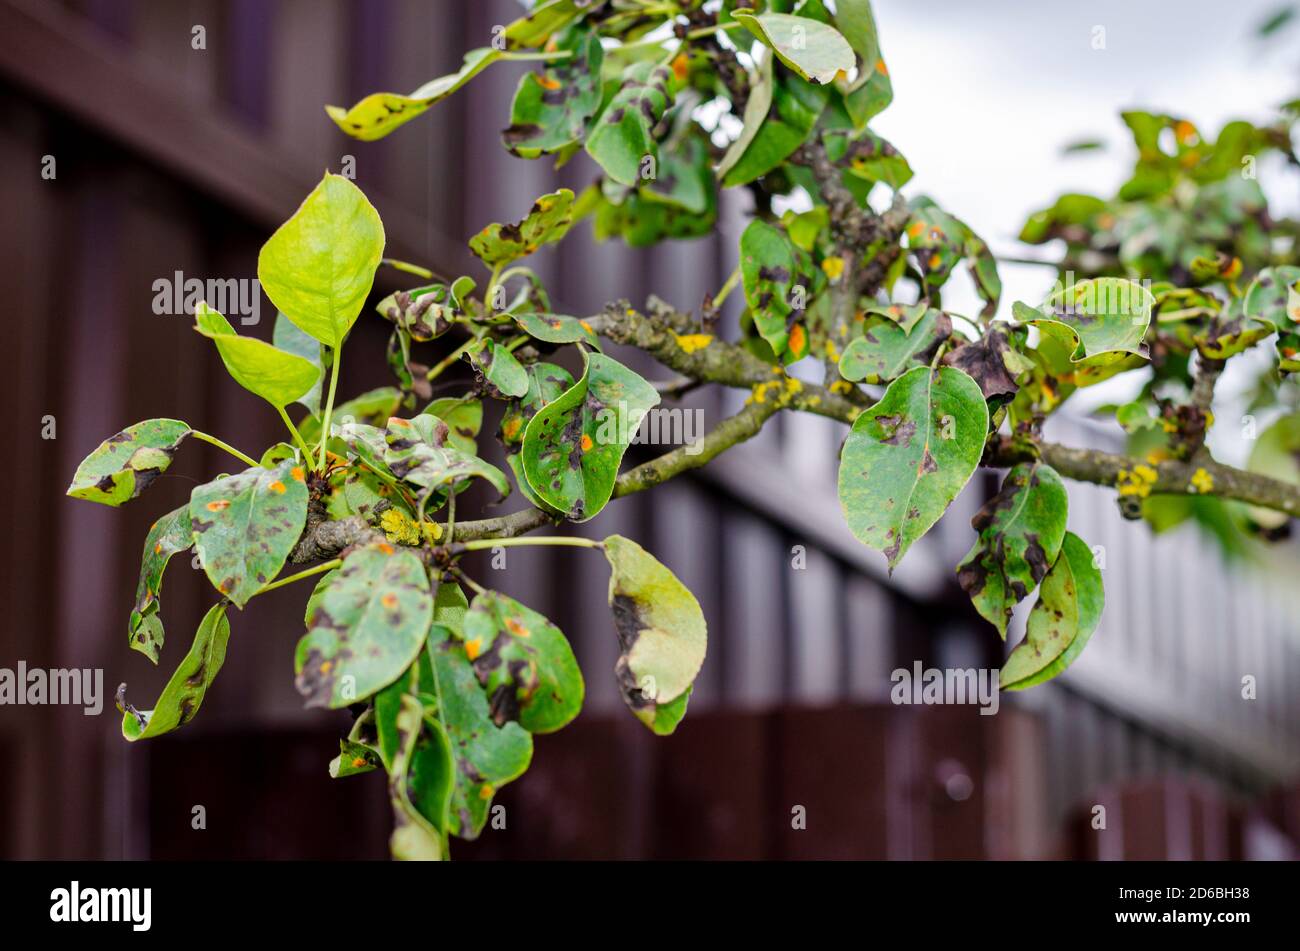 Leaves of fruit trees affected by fungal diseases Stock Photo